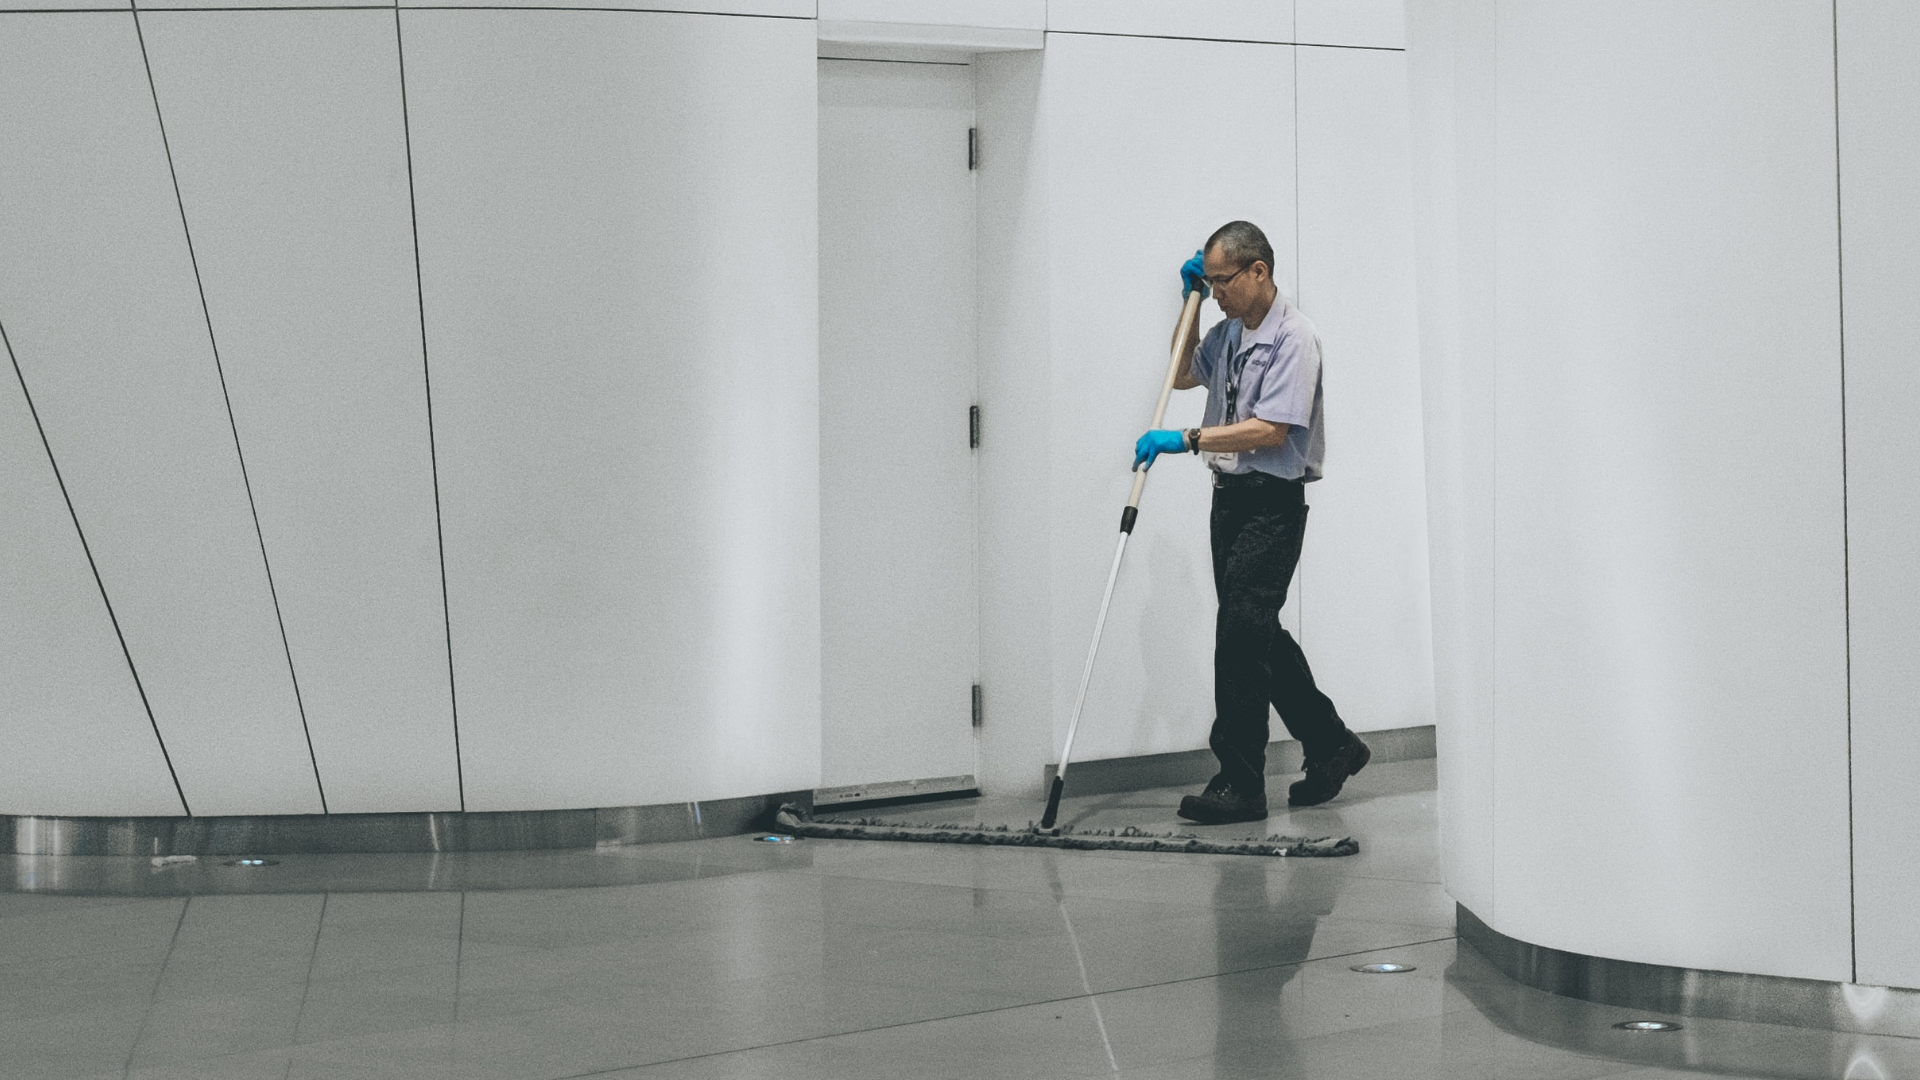 Cleaner sweeps the floor inside an office building